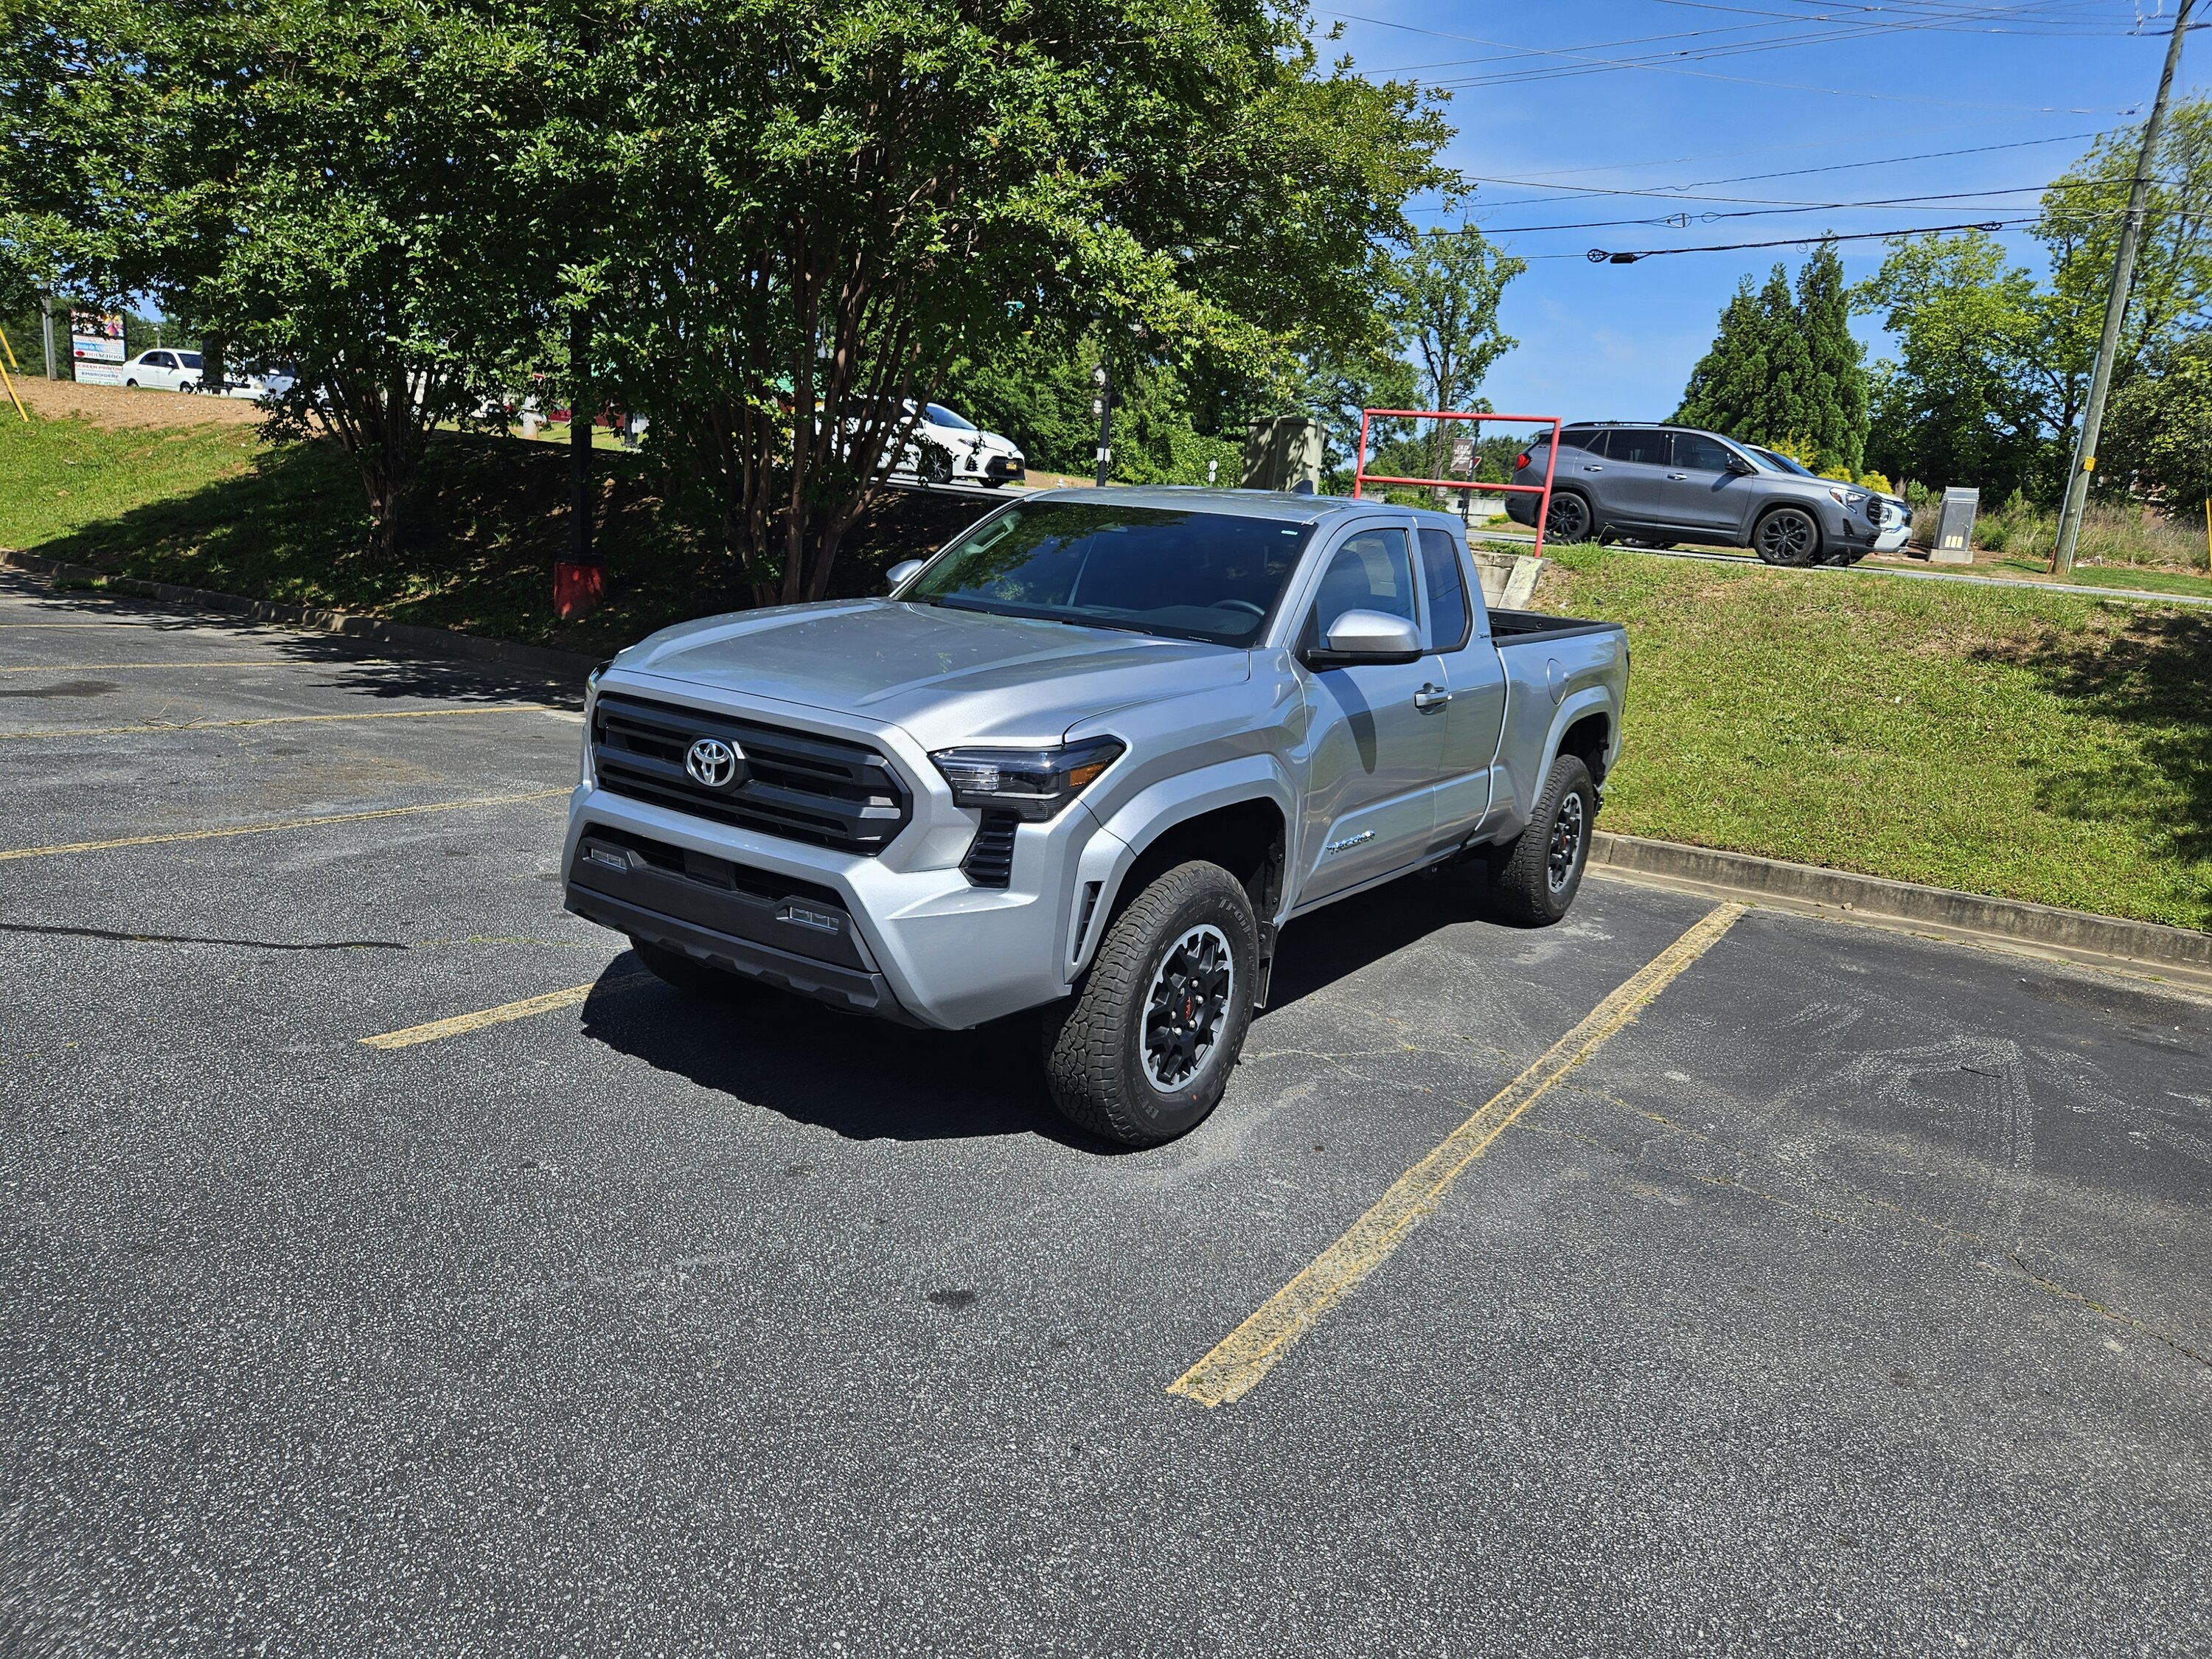 2024 Tacoma Xtracab 2024 Tacoma SR5 in Celestial Silver Metallic w/ better photos, different wheels, and a basic review 1000007585